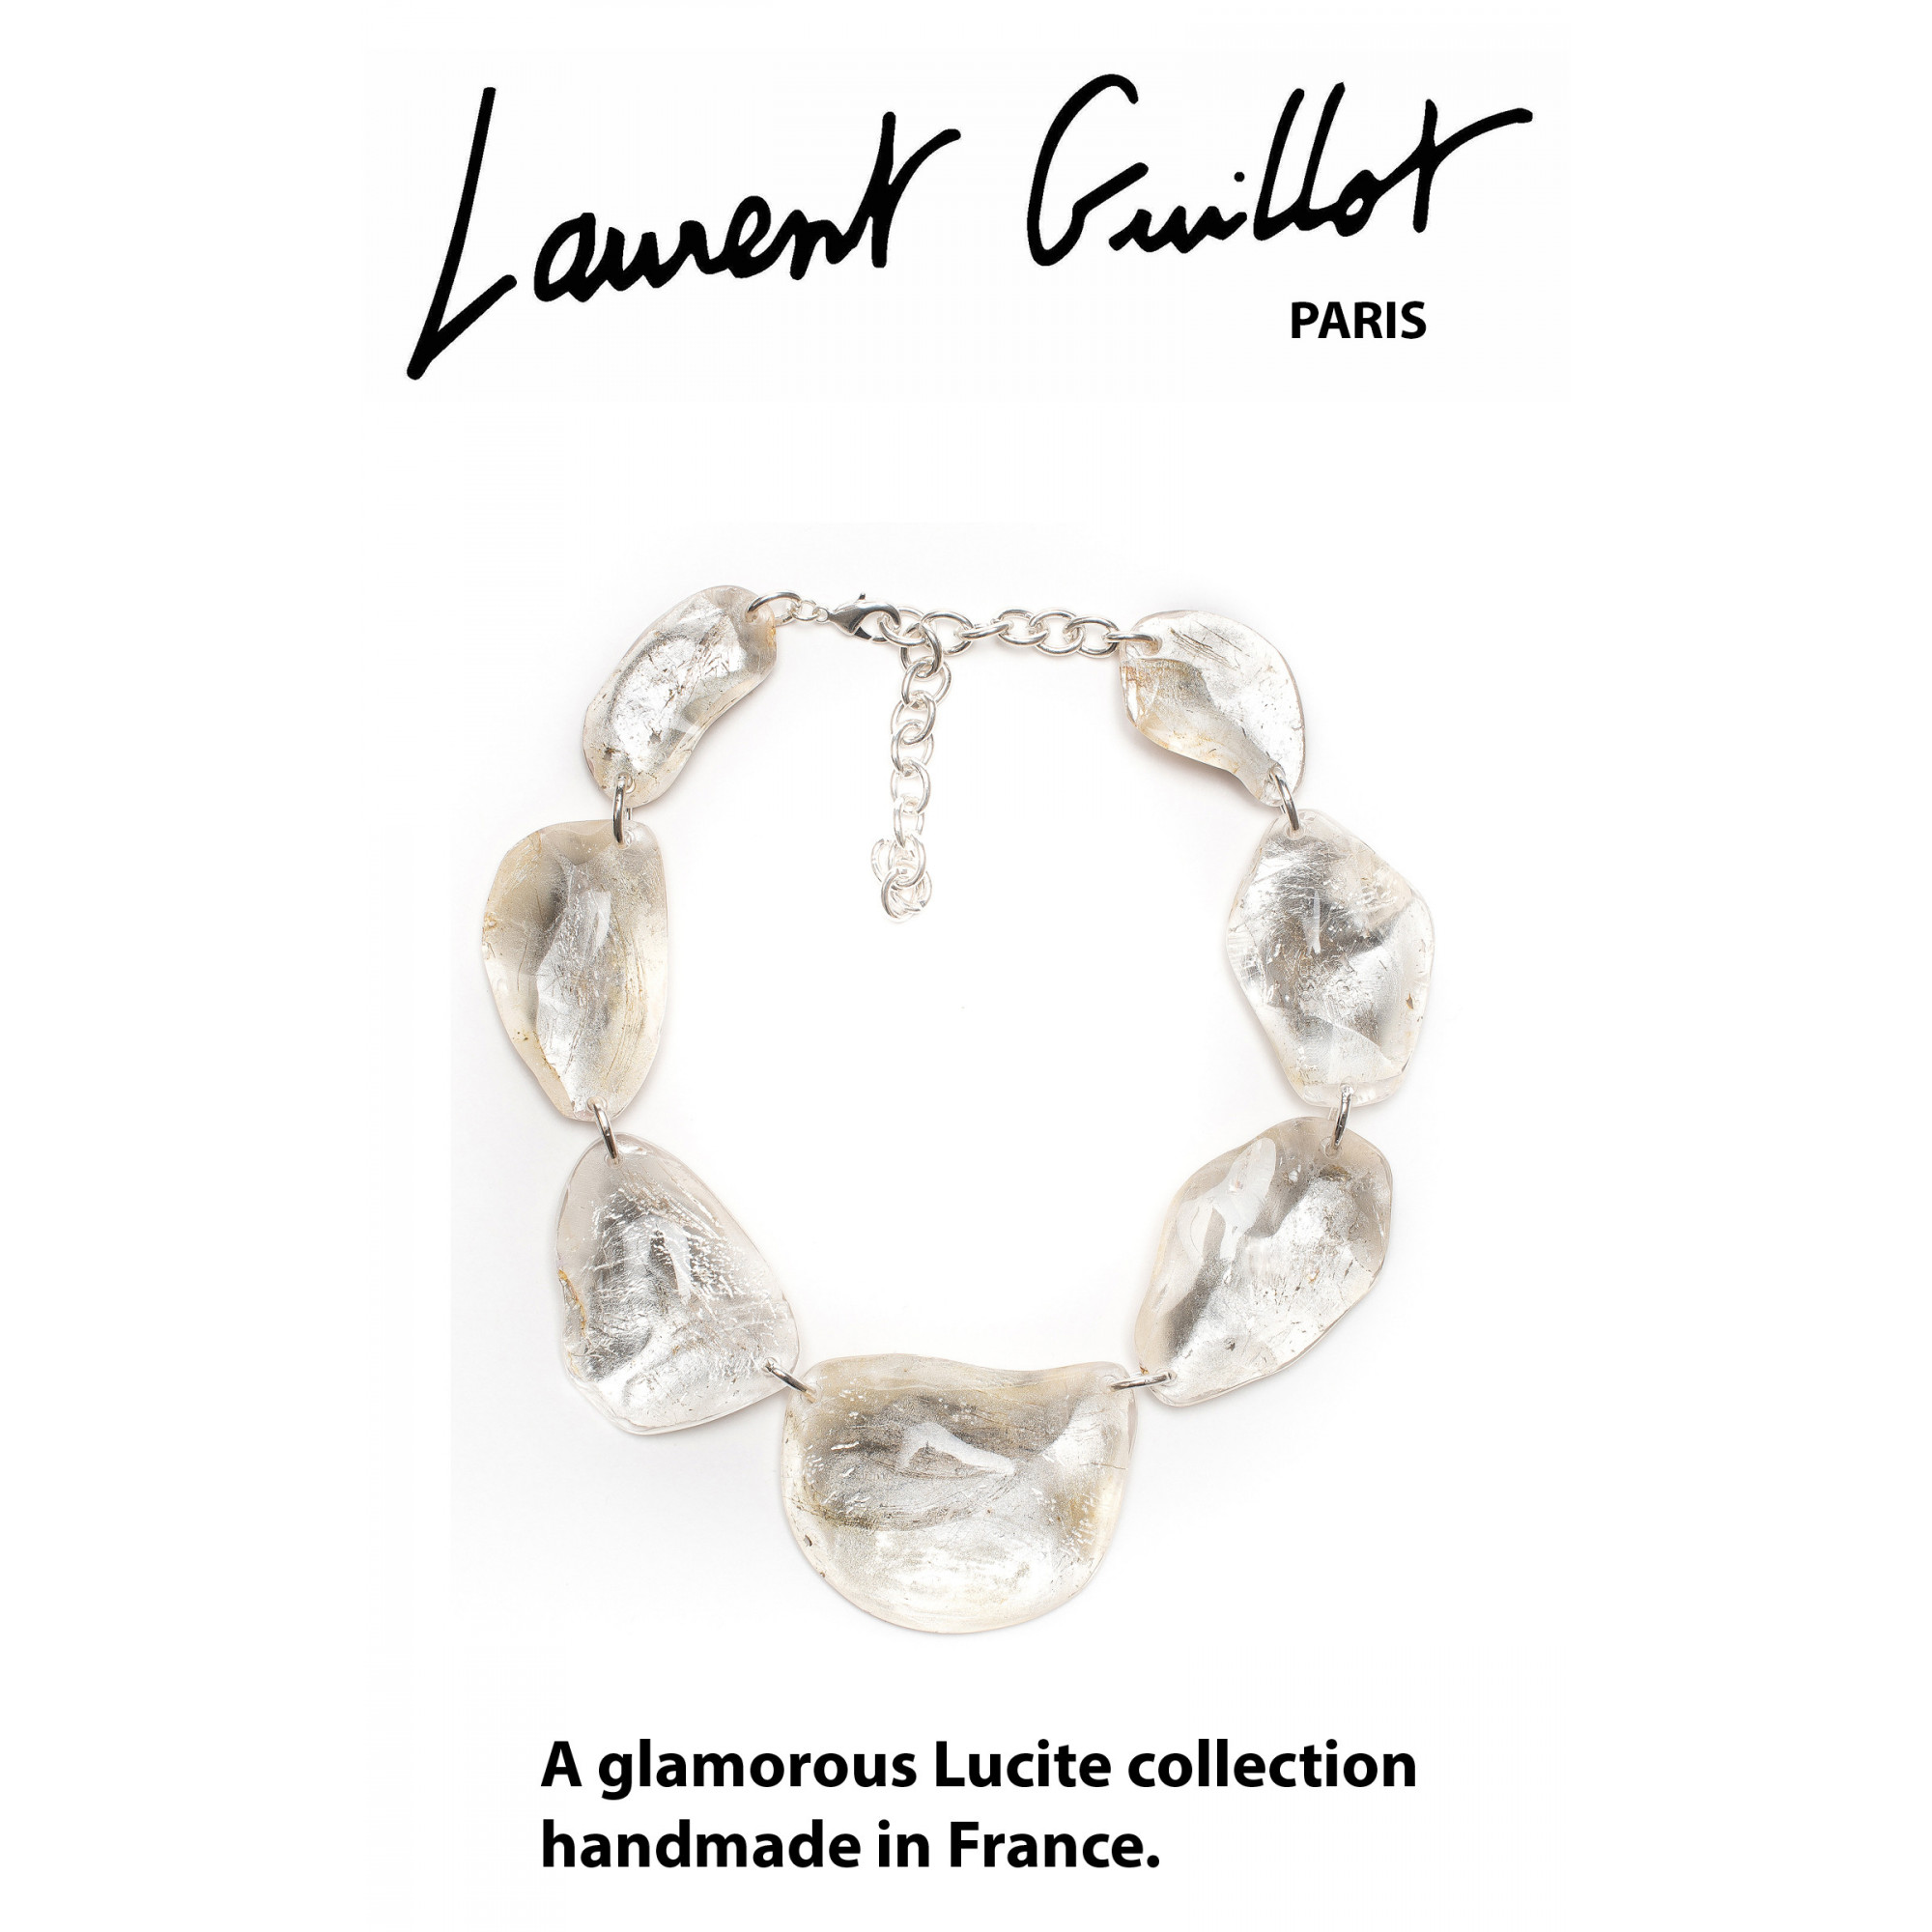 Laurent Guillot Jewelry | Contemporary Jewelry Designers| Nikaia Jewelry